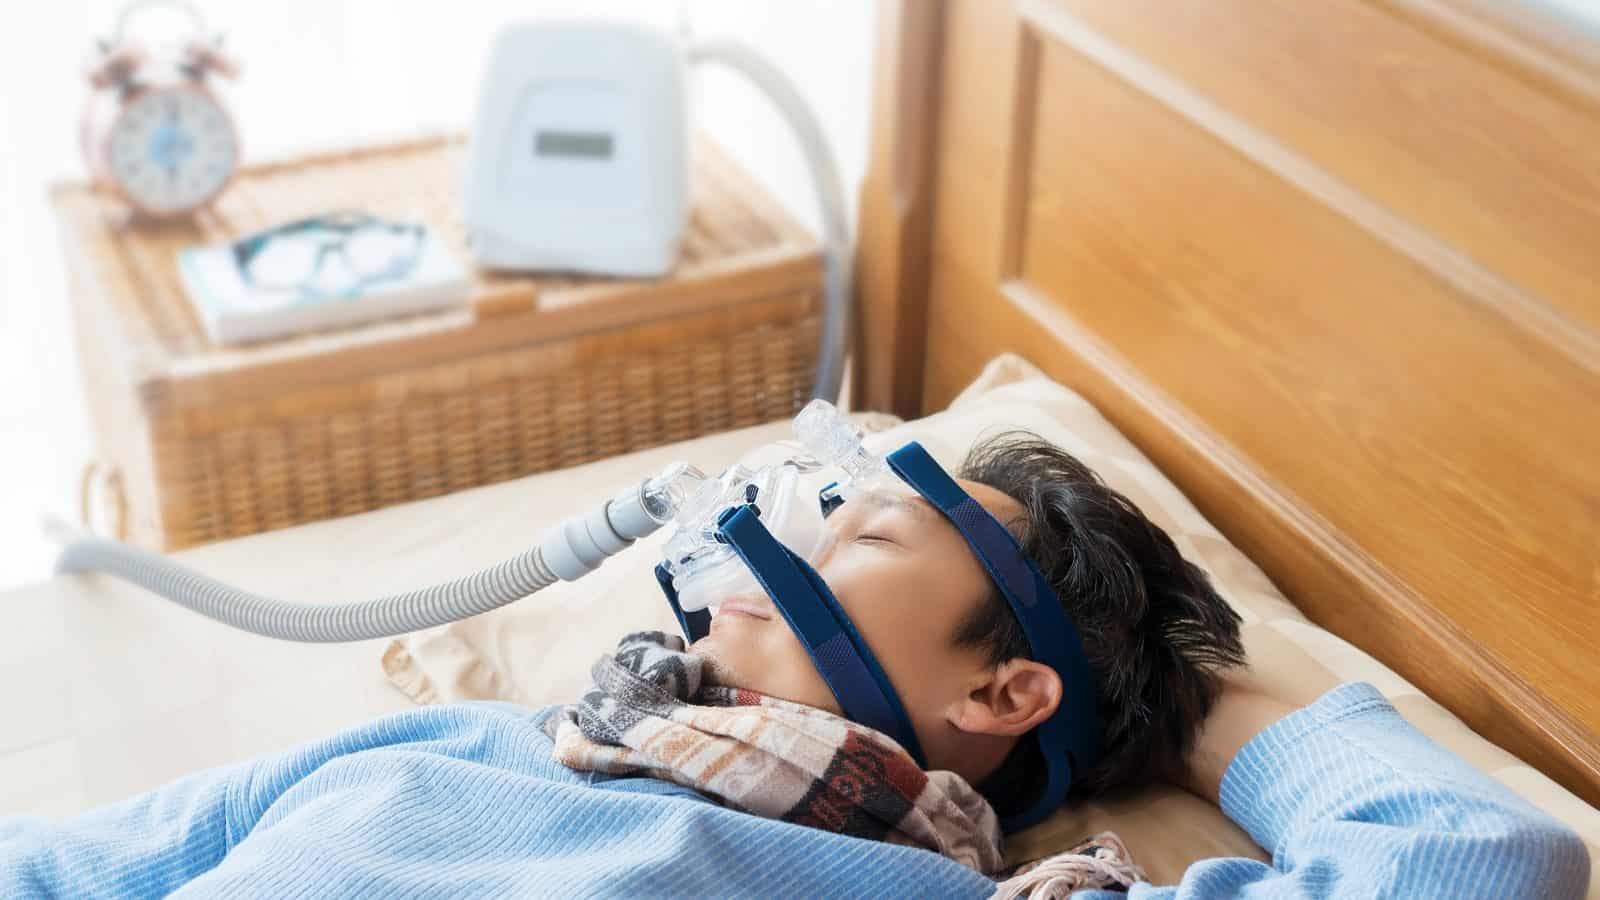 A Comprehensive Guide to Selecting the Right CPAP Machine for You